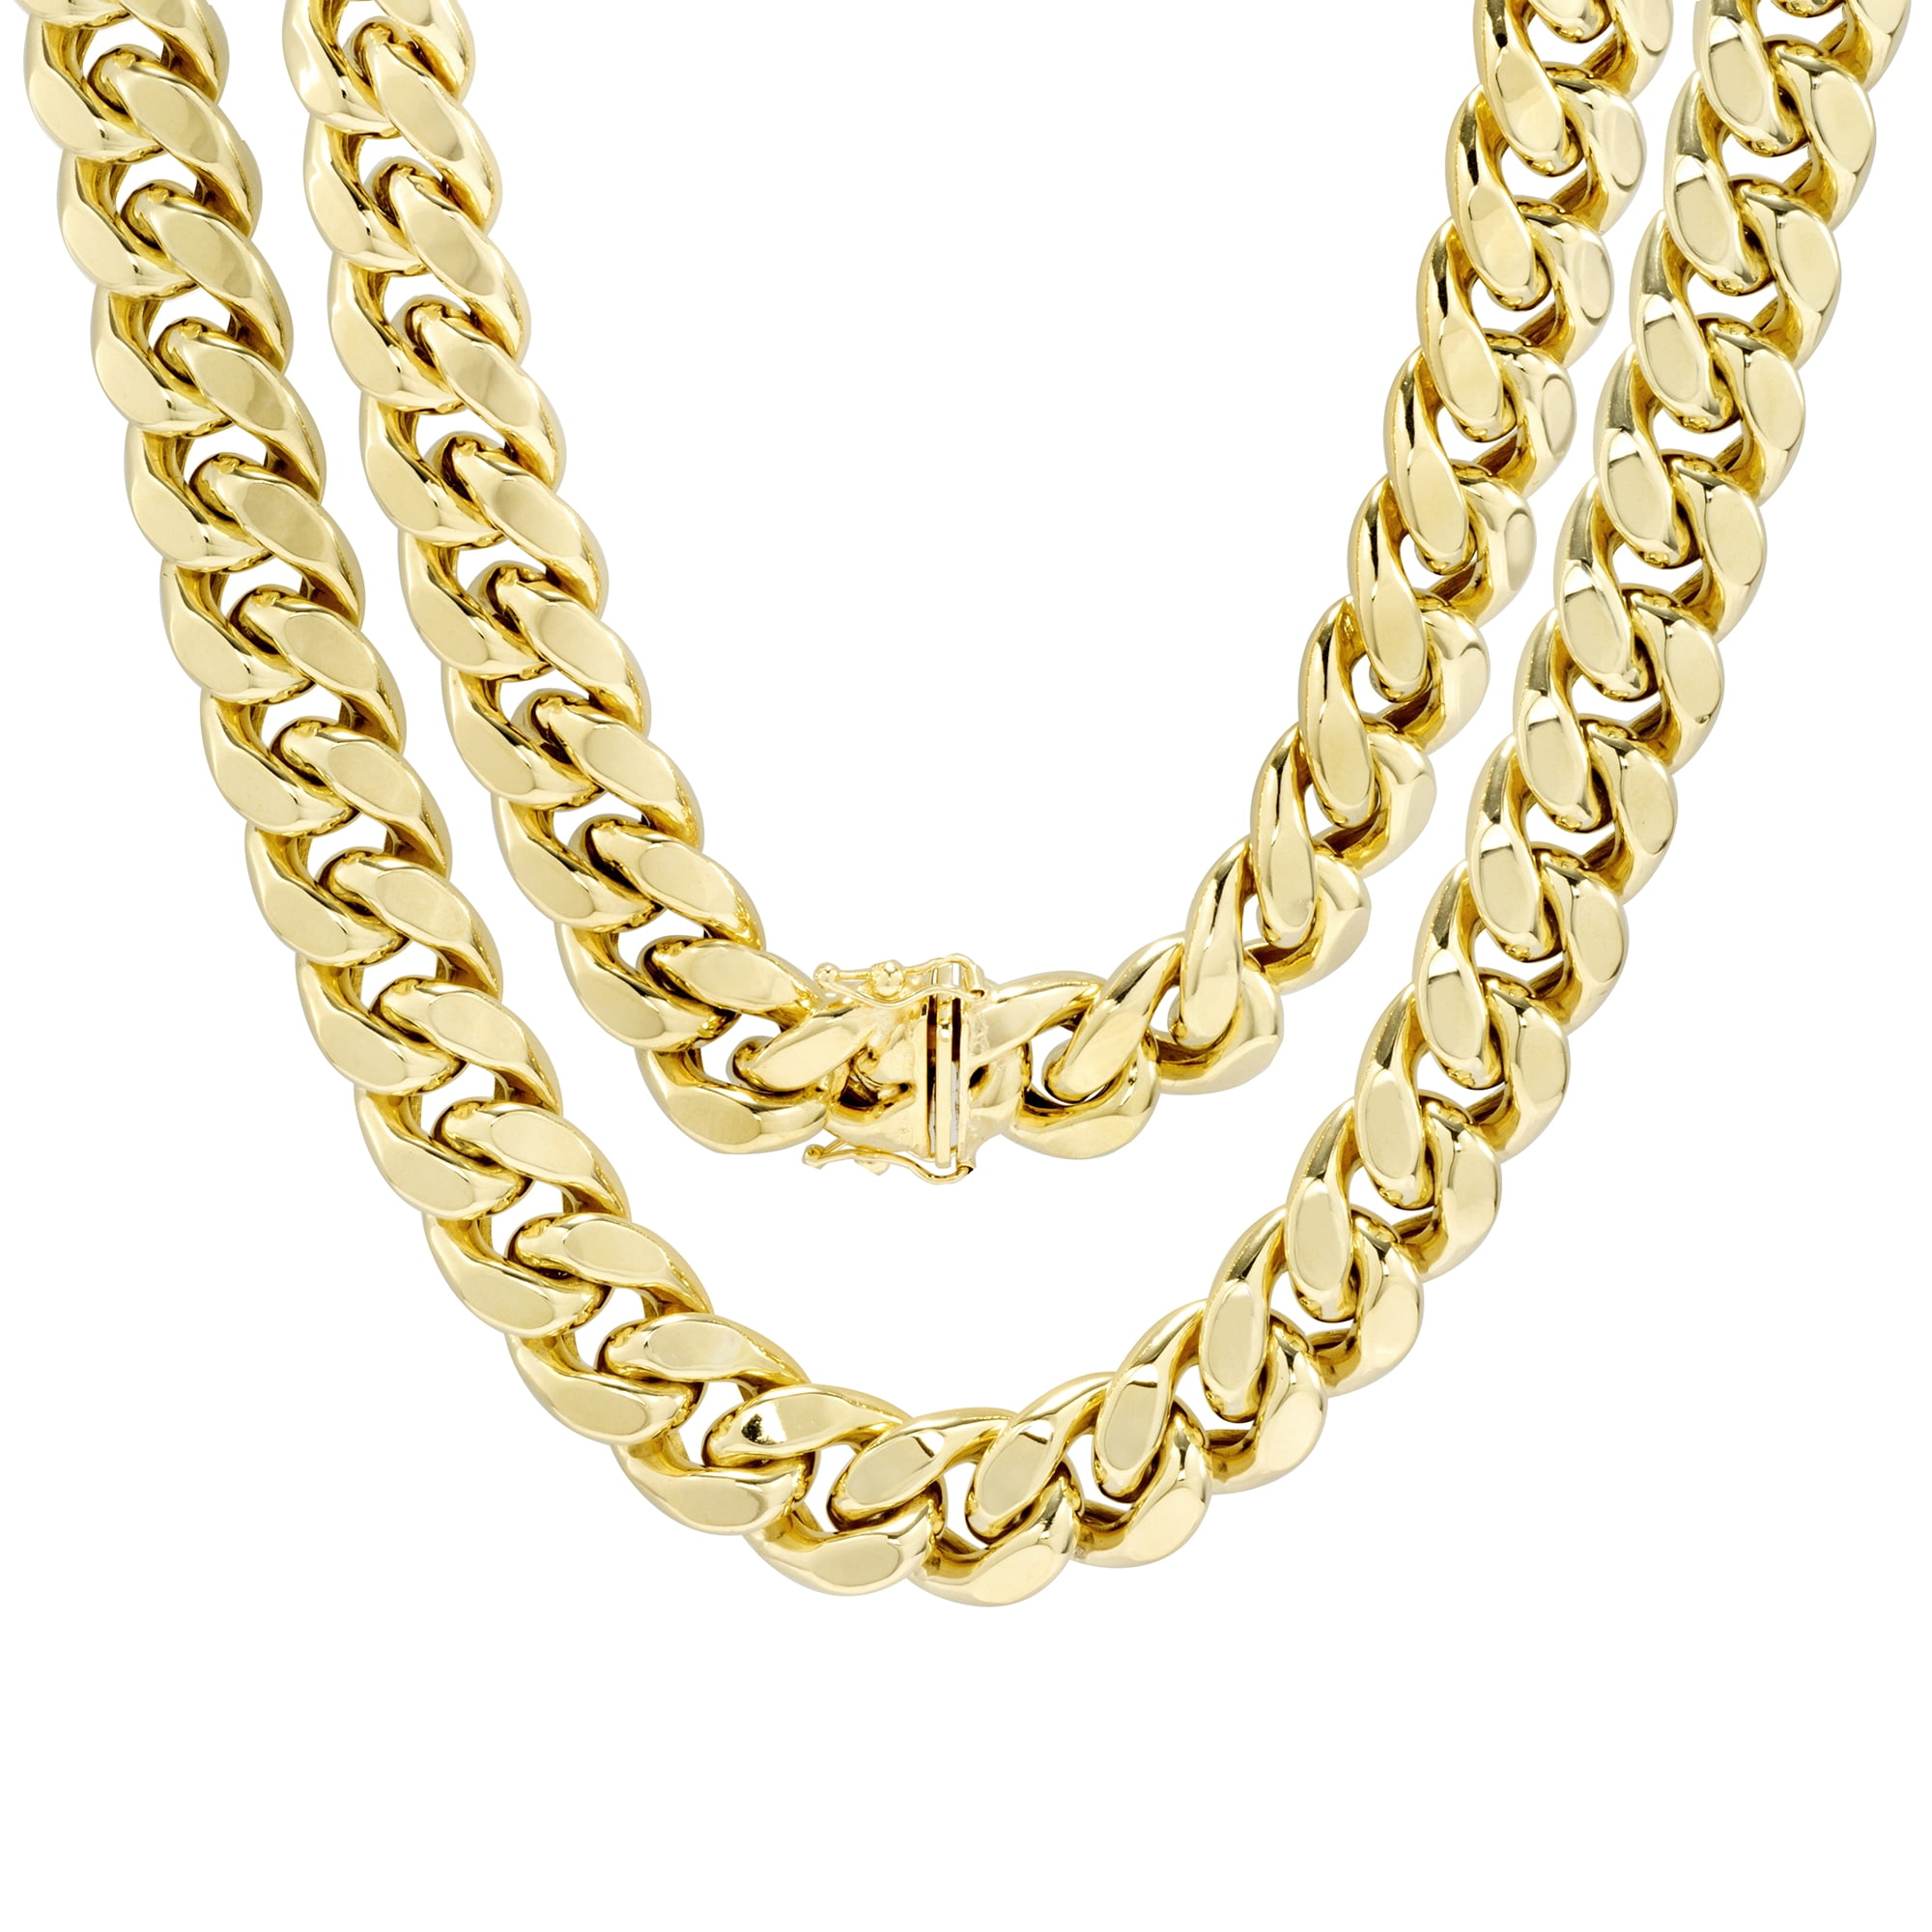 Nuragold 10k Yellow Gold 11mm Miami Cuban Link Chain Necklace, Mens Thick  Jewelry with Box Clasp 22